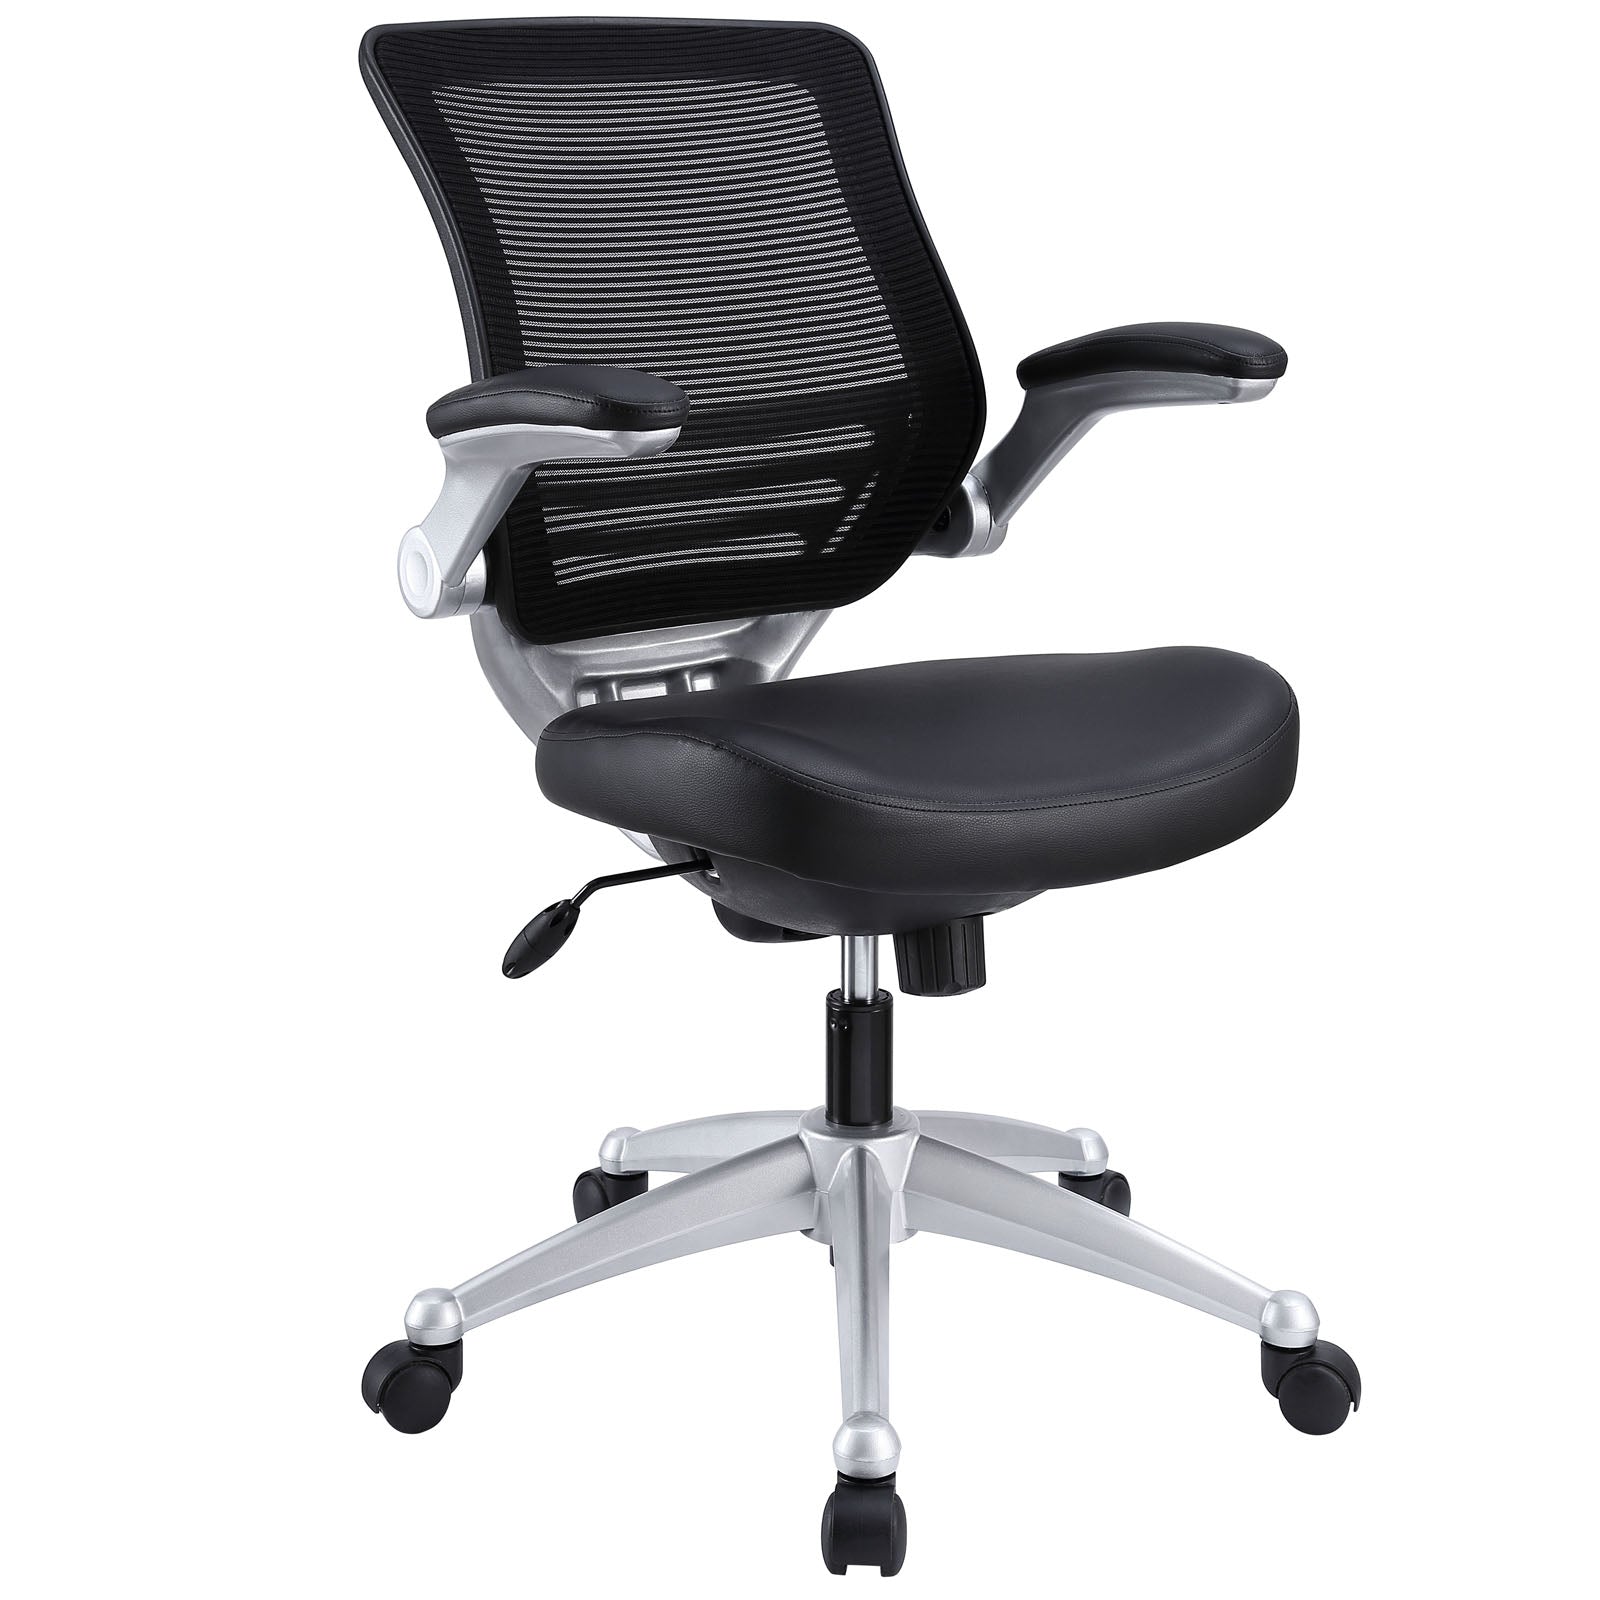 Edge Leather Office Chair - East Shore Modern Home Furnishings